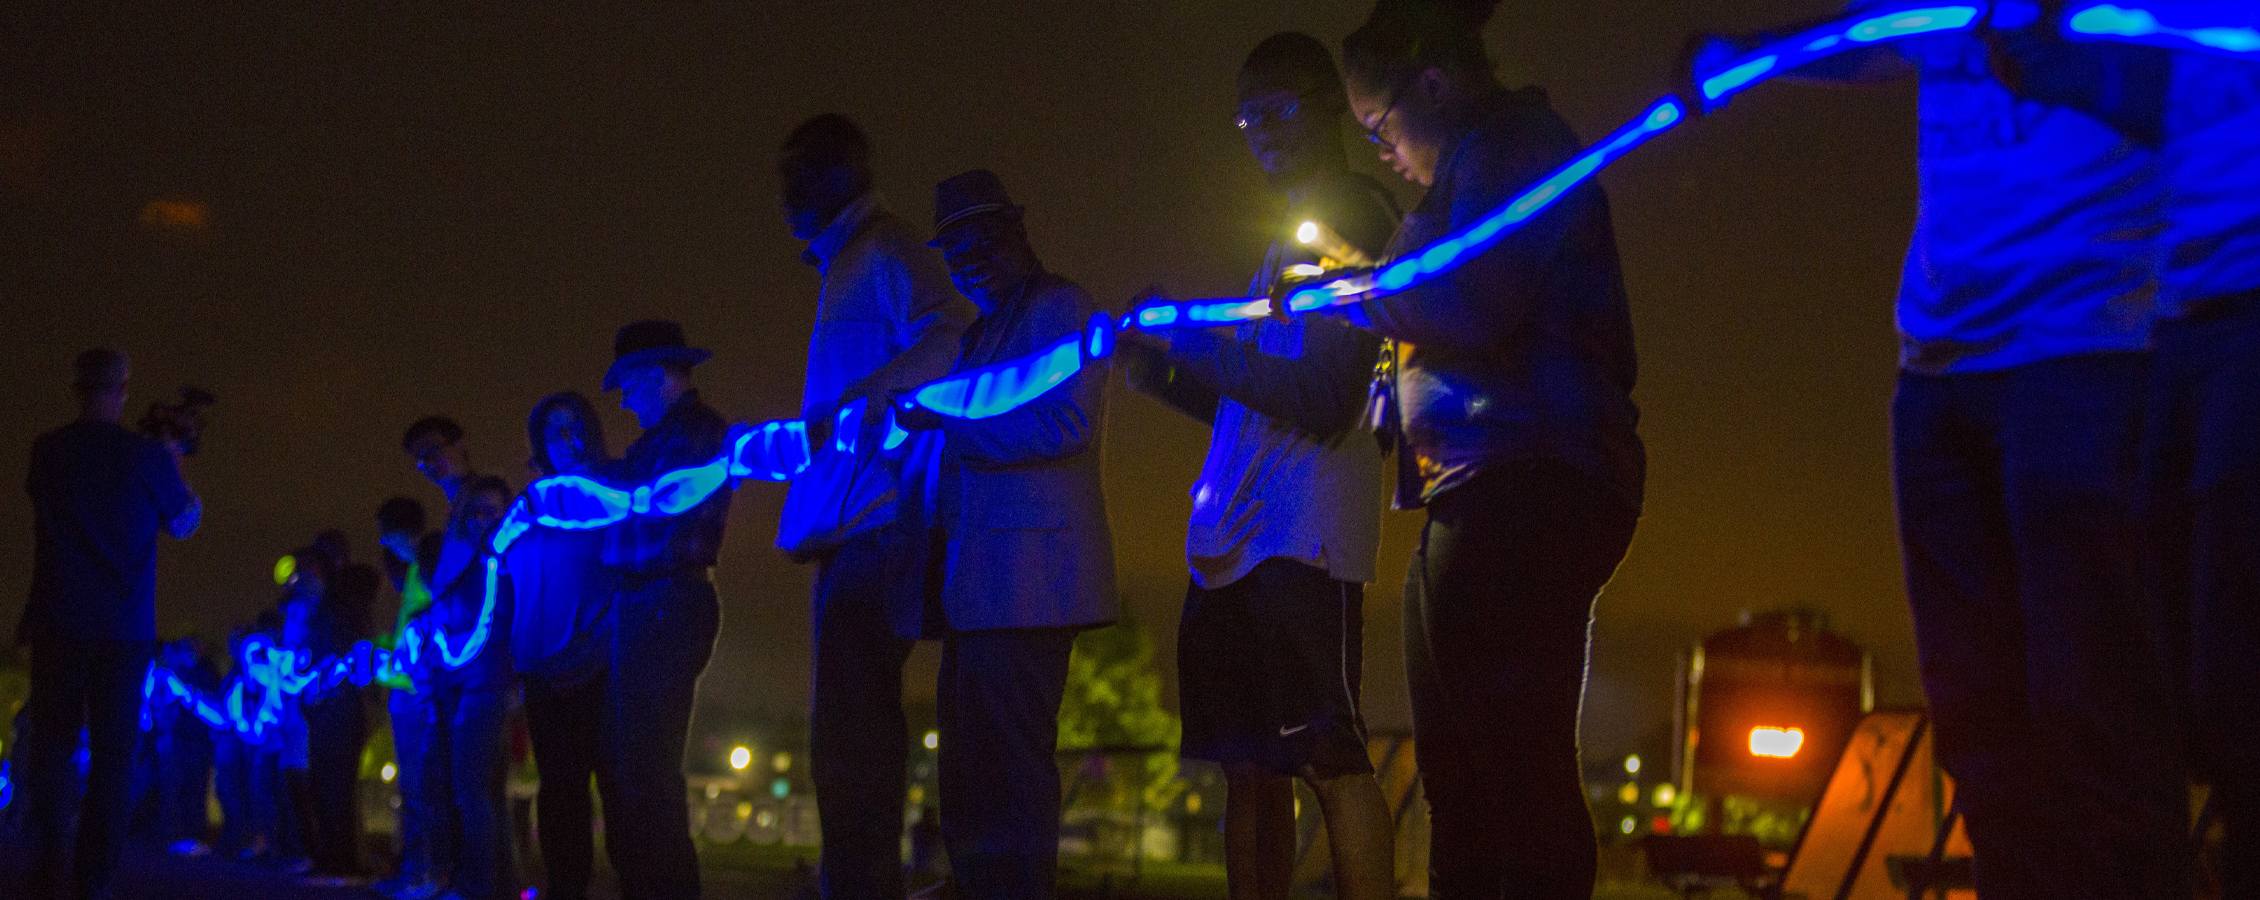 Students stand in a line outside holding a long blue glowstick.